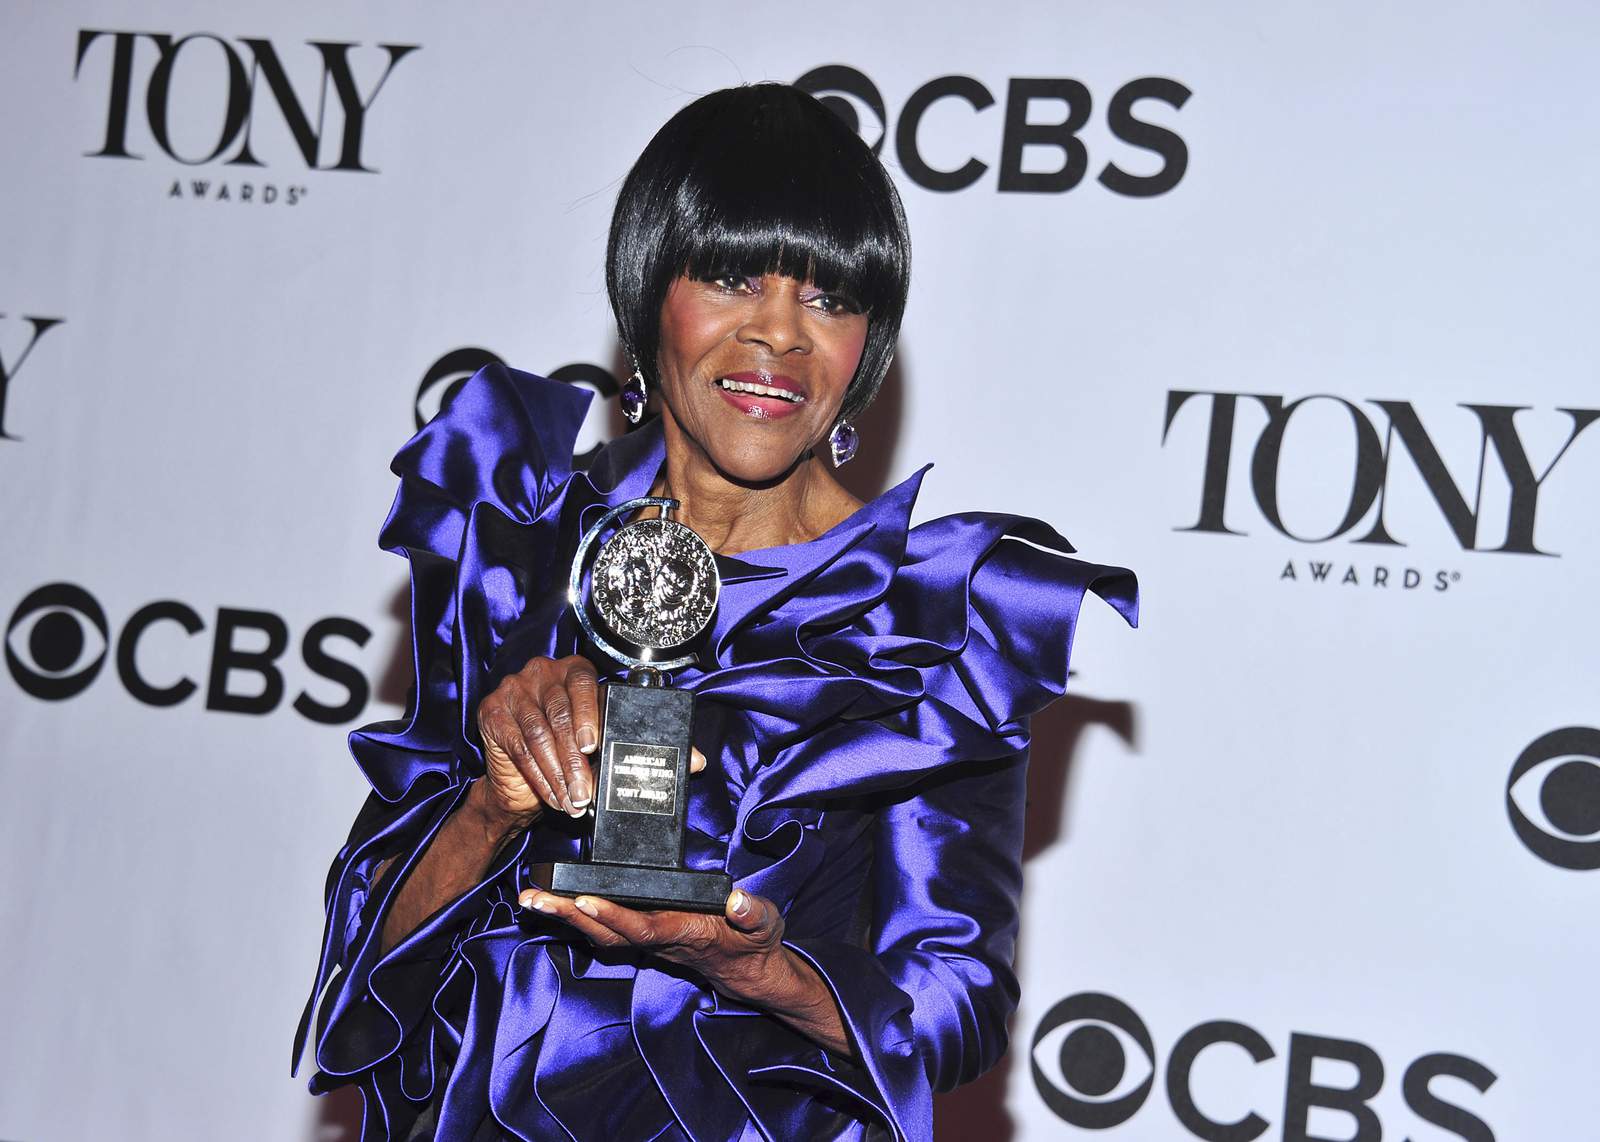 Barack Obama, Tyler Perry among those writing touching tributes to late actress Cicely Tyson